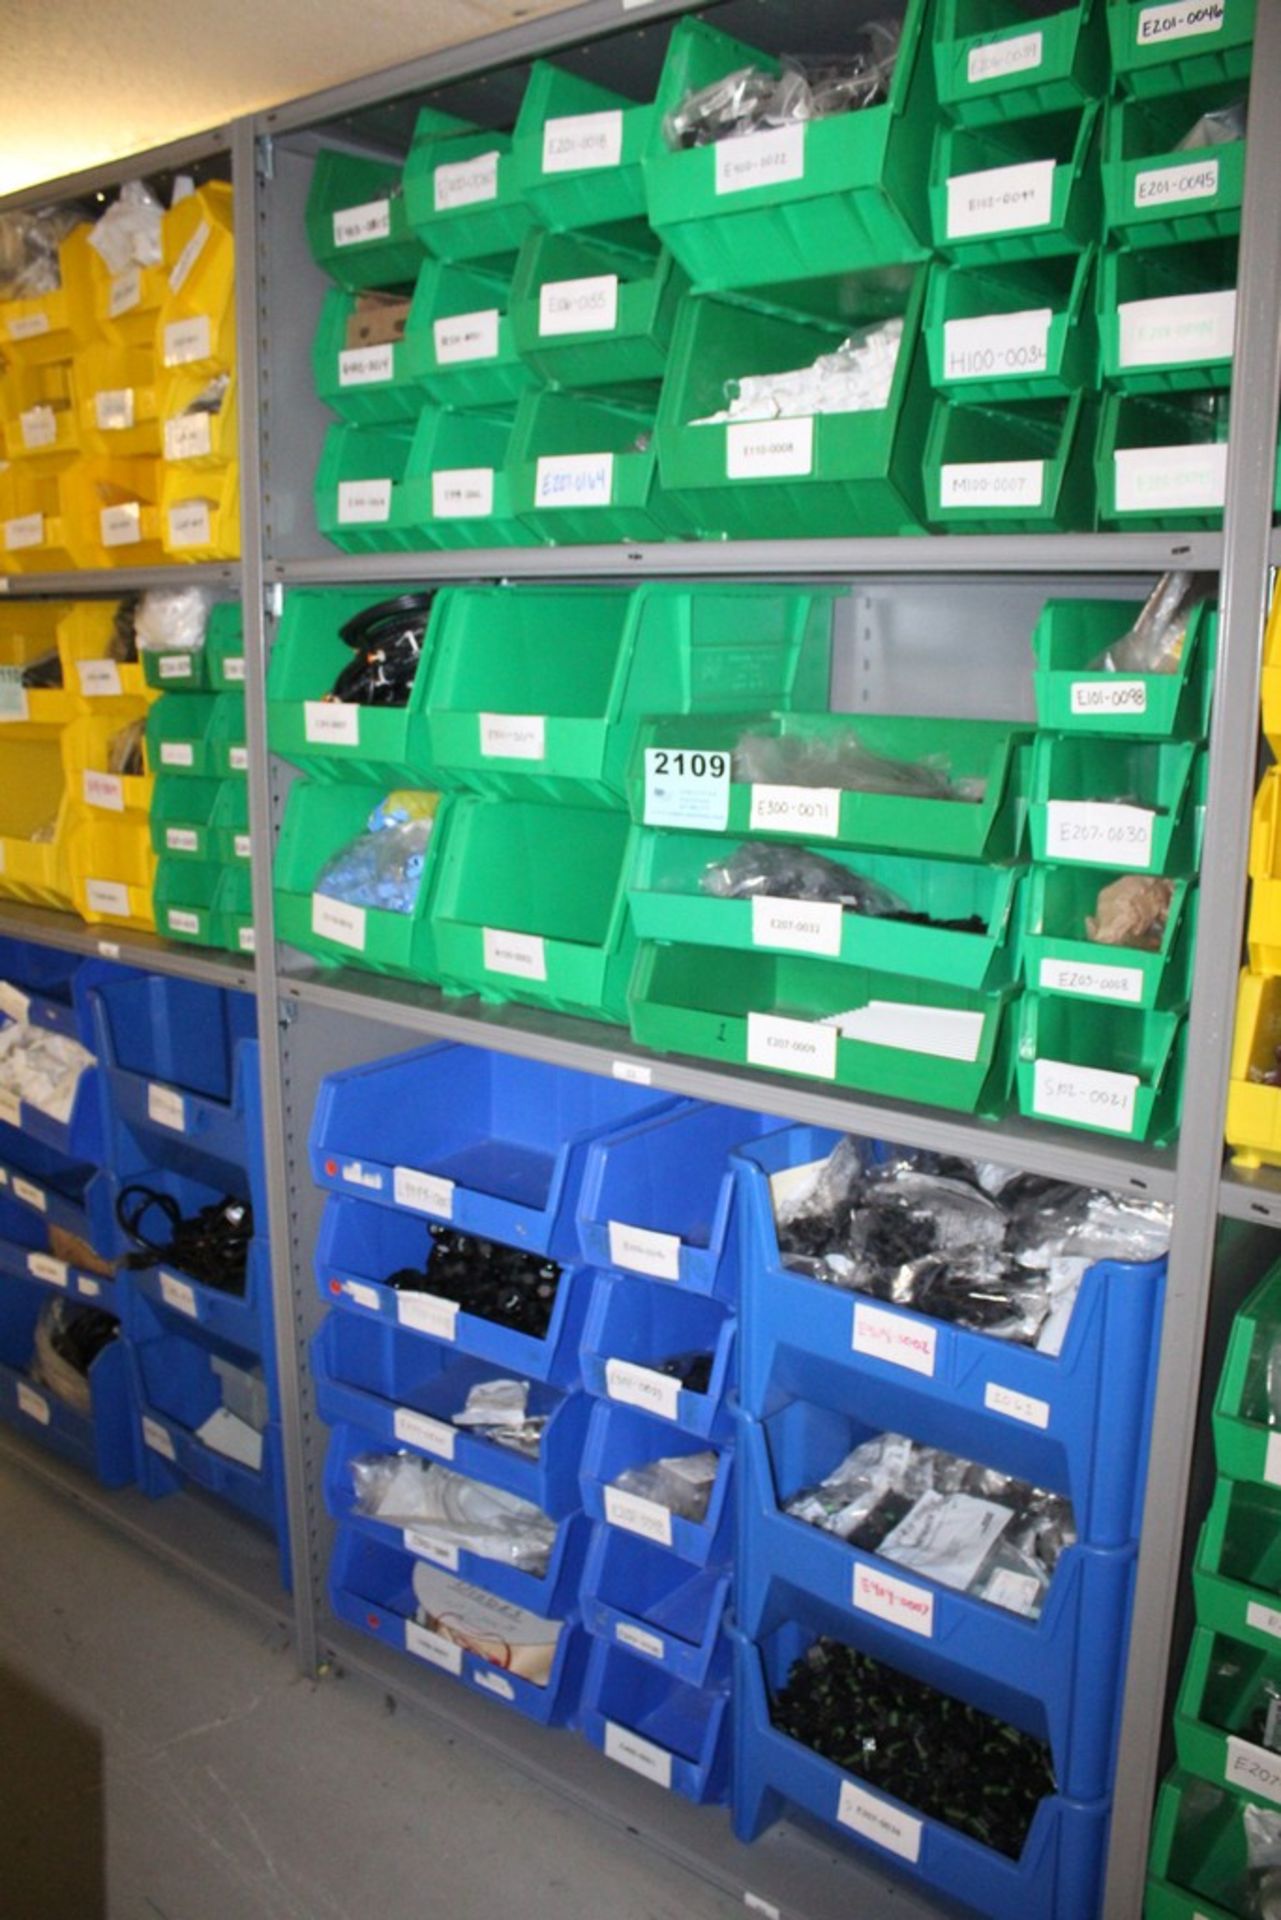 ASSORTED ELECTRICAL COMPONENTS IN BINS ON SHELVING UNIT, WITH BINS